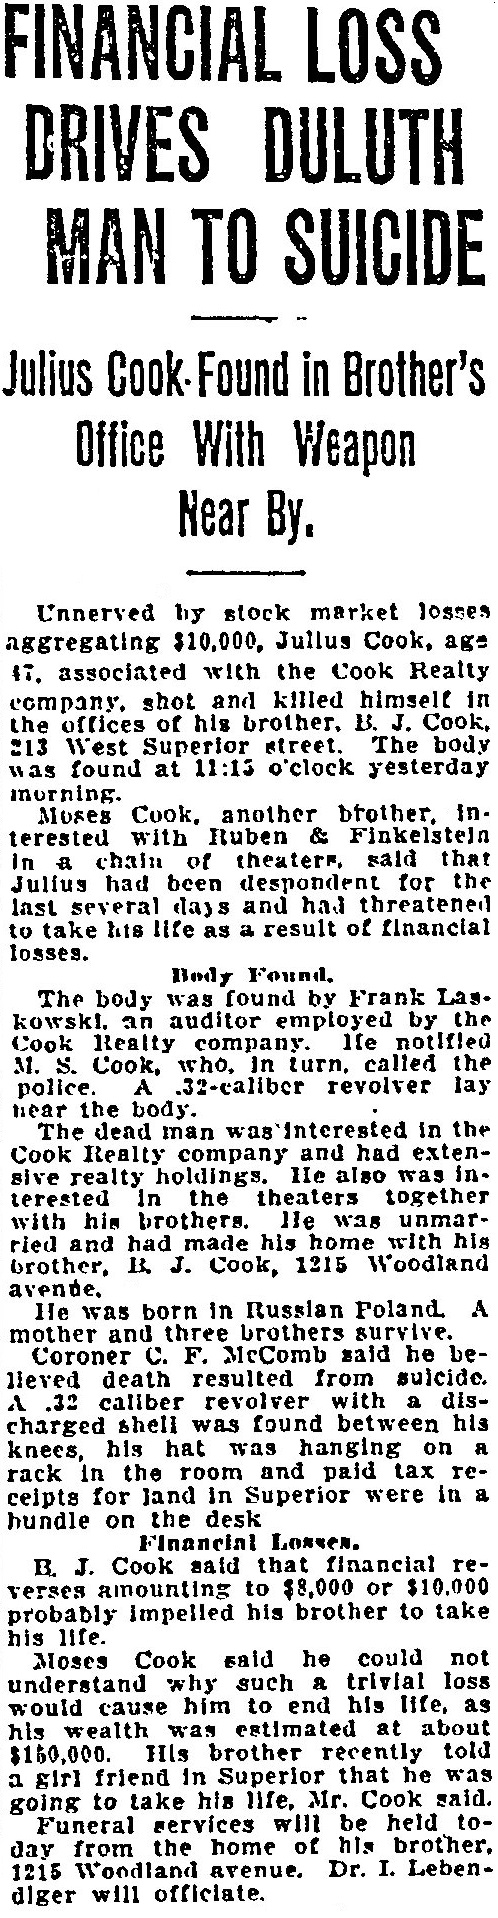 Financial loss drives Duluth man to suicide - 21Aug1921